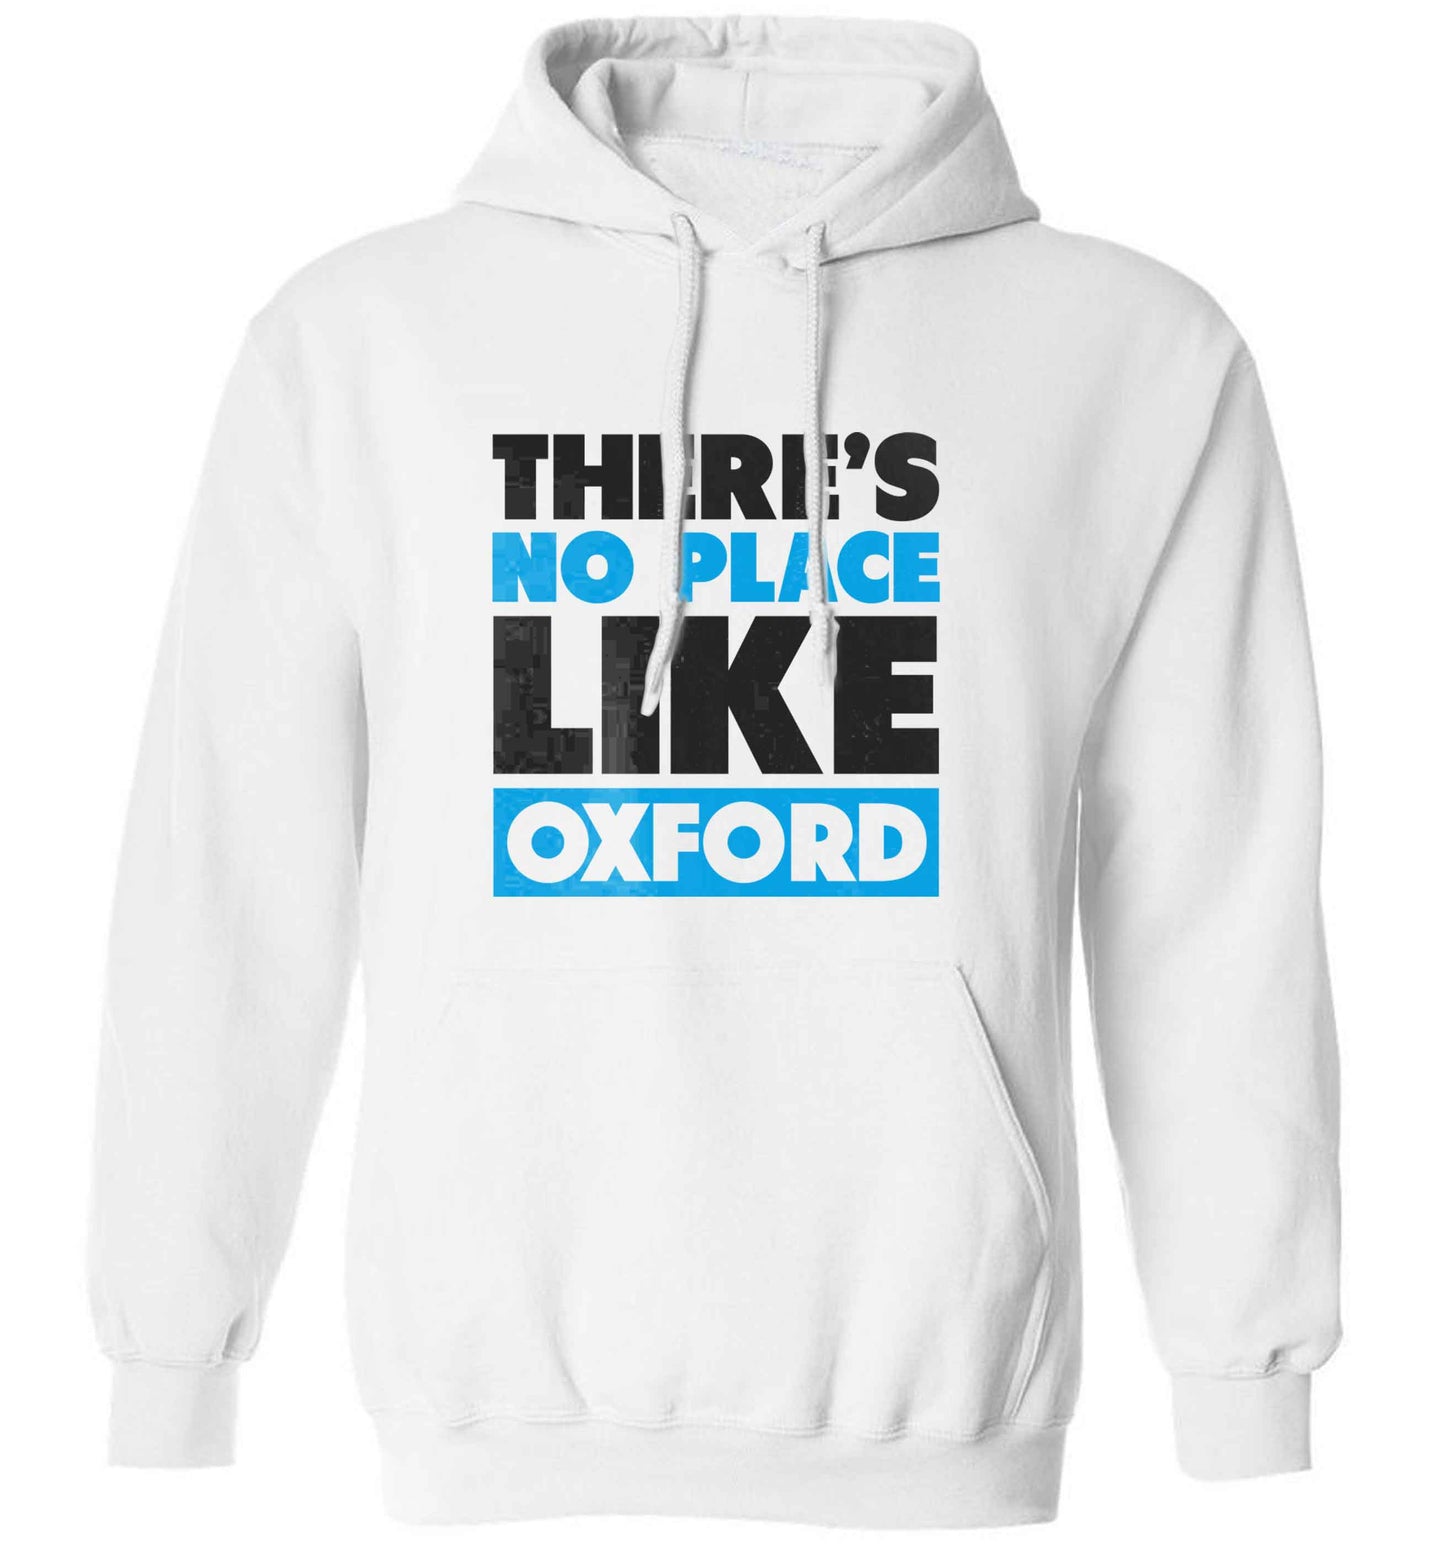 There's no place like Oxford adults unisex white hoodie 2XL